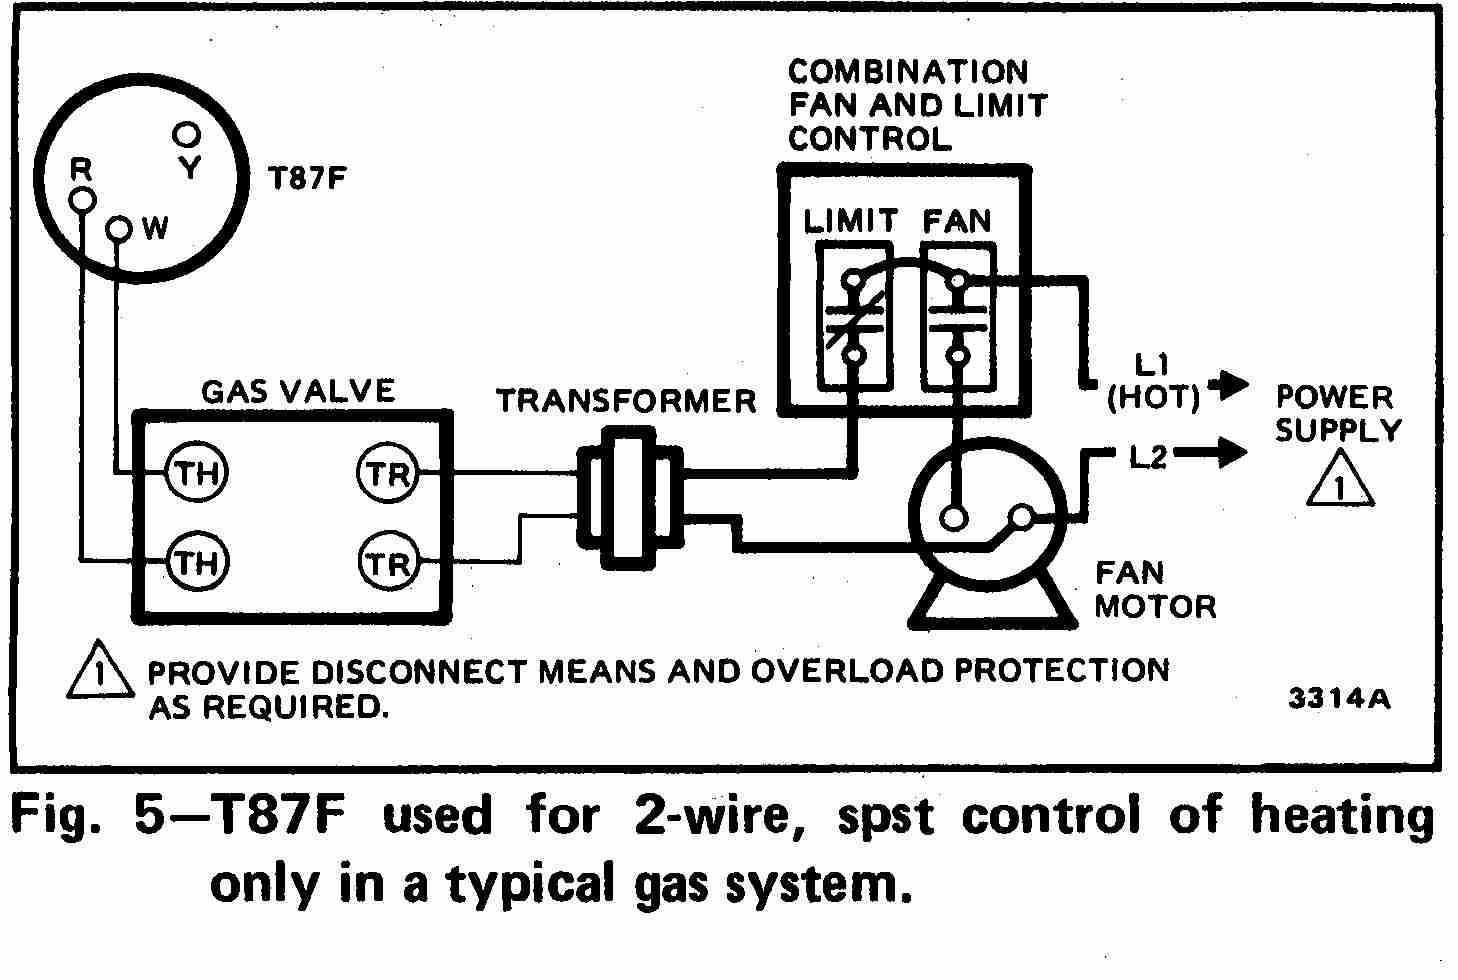 Room Thermostat Wiring Diagrams For Hvac Systems - Hvac Wiring Diagram